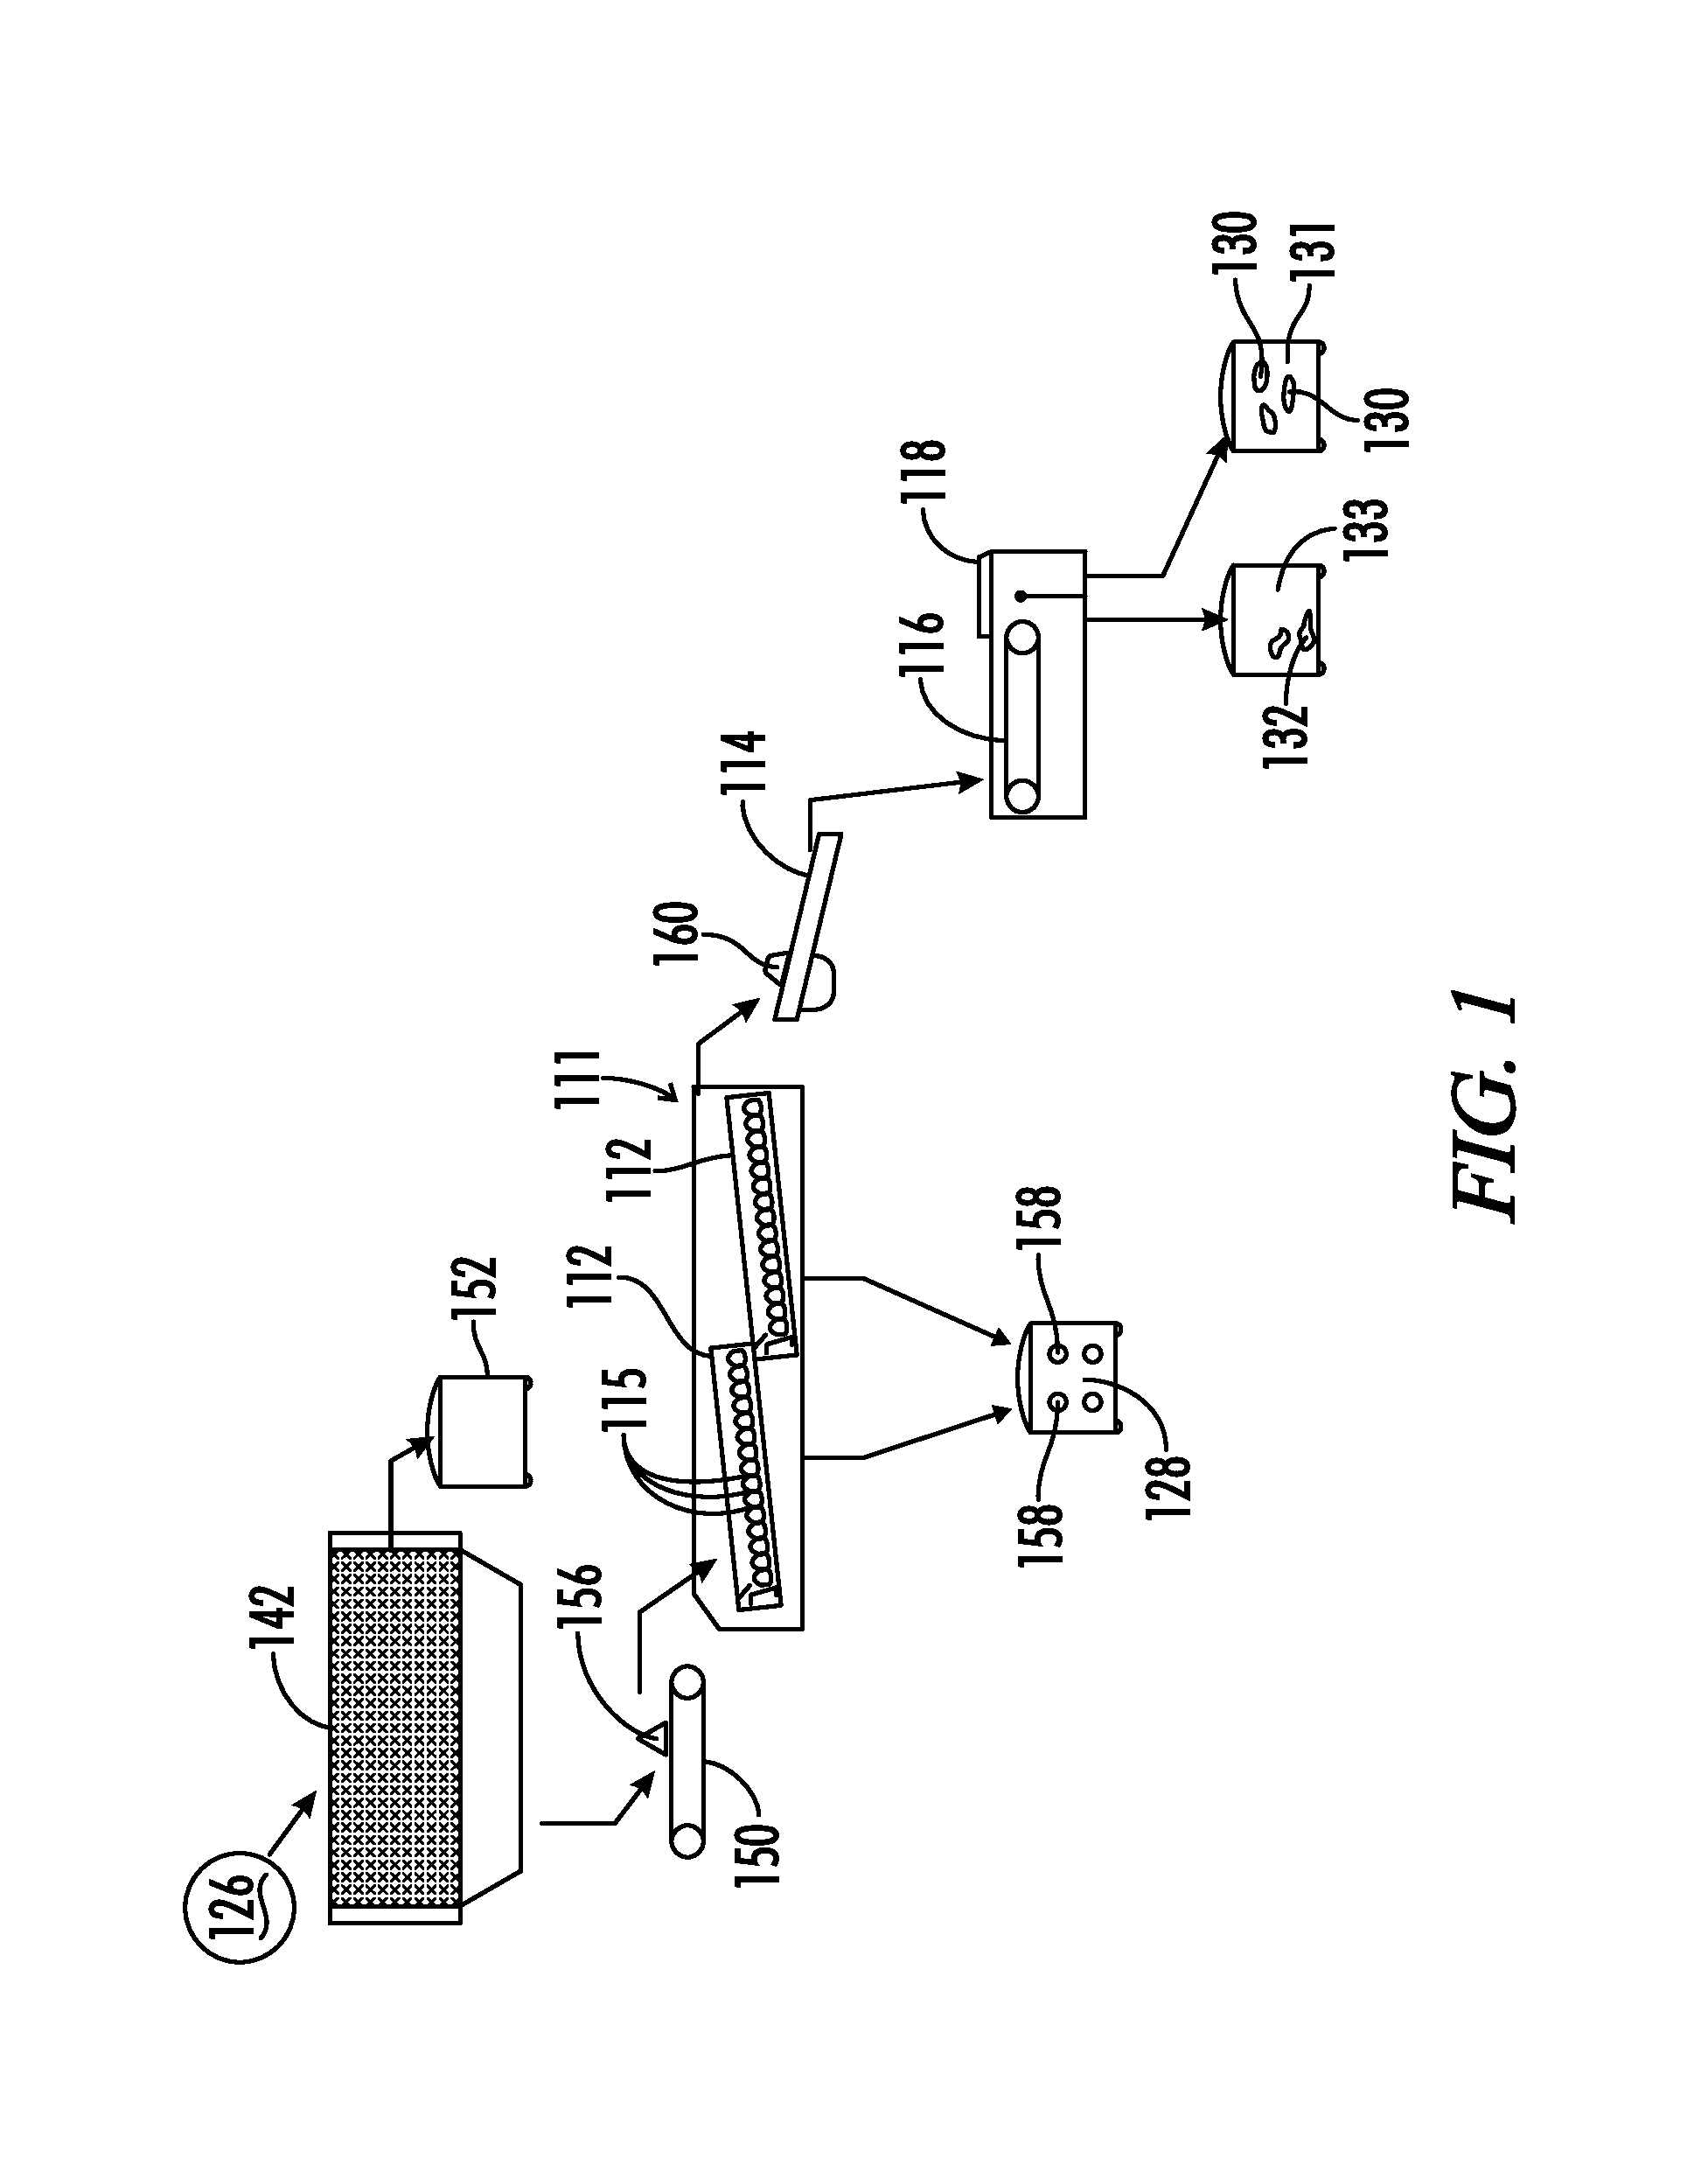 Methods of Processing Waste Material to Render a Compostable Product